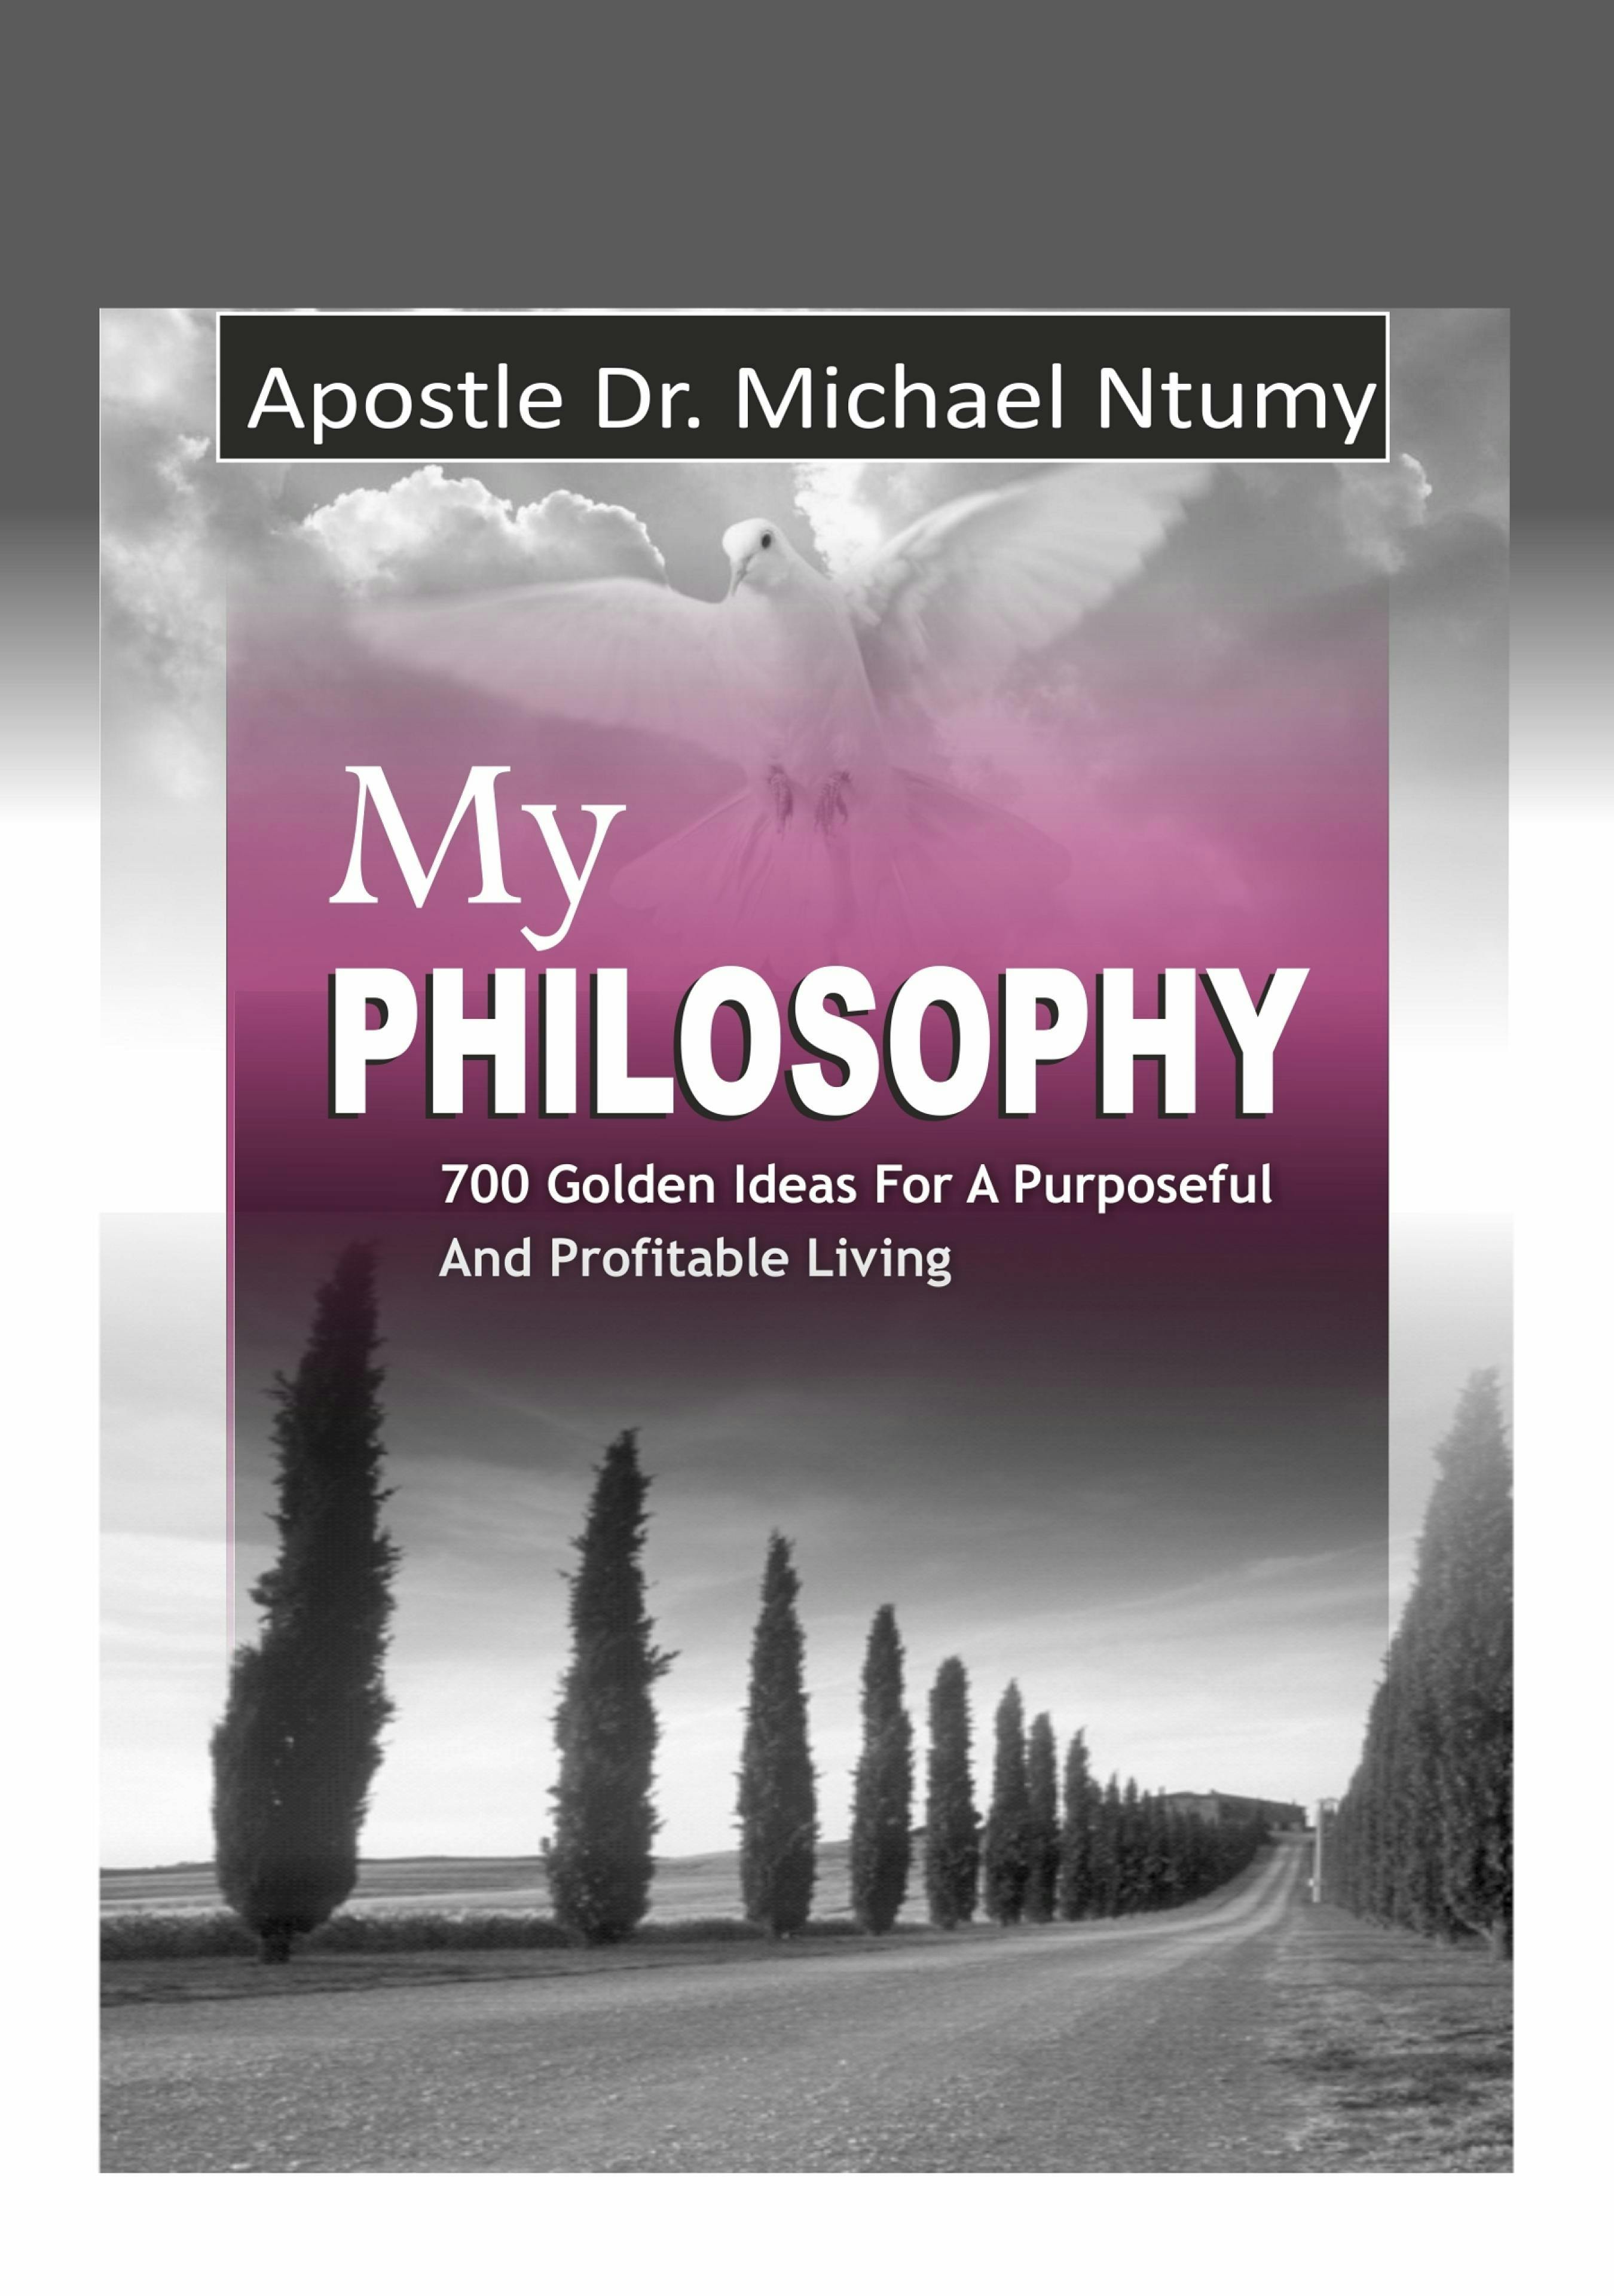 My Philosophy: 700 Golden Ideas for a Purposeful and Profitable Living - Apostle Dr. Michael Ntumy